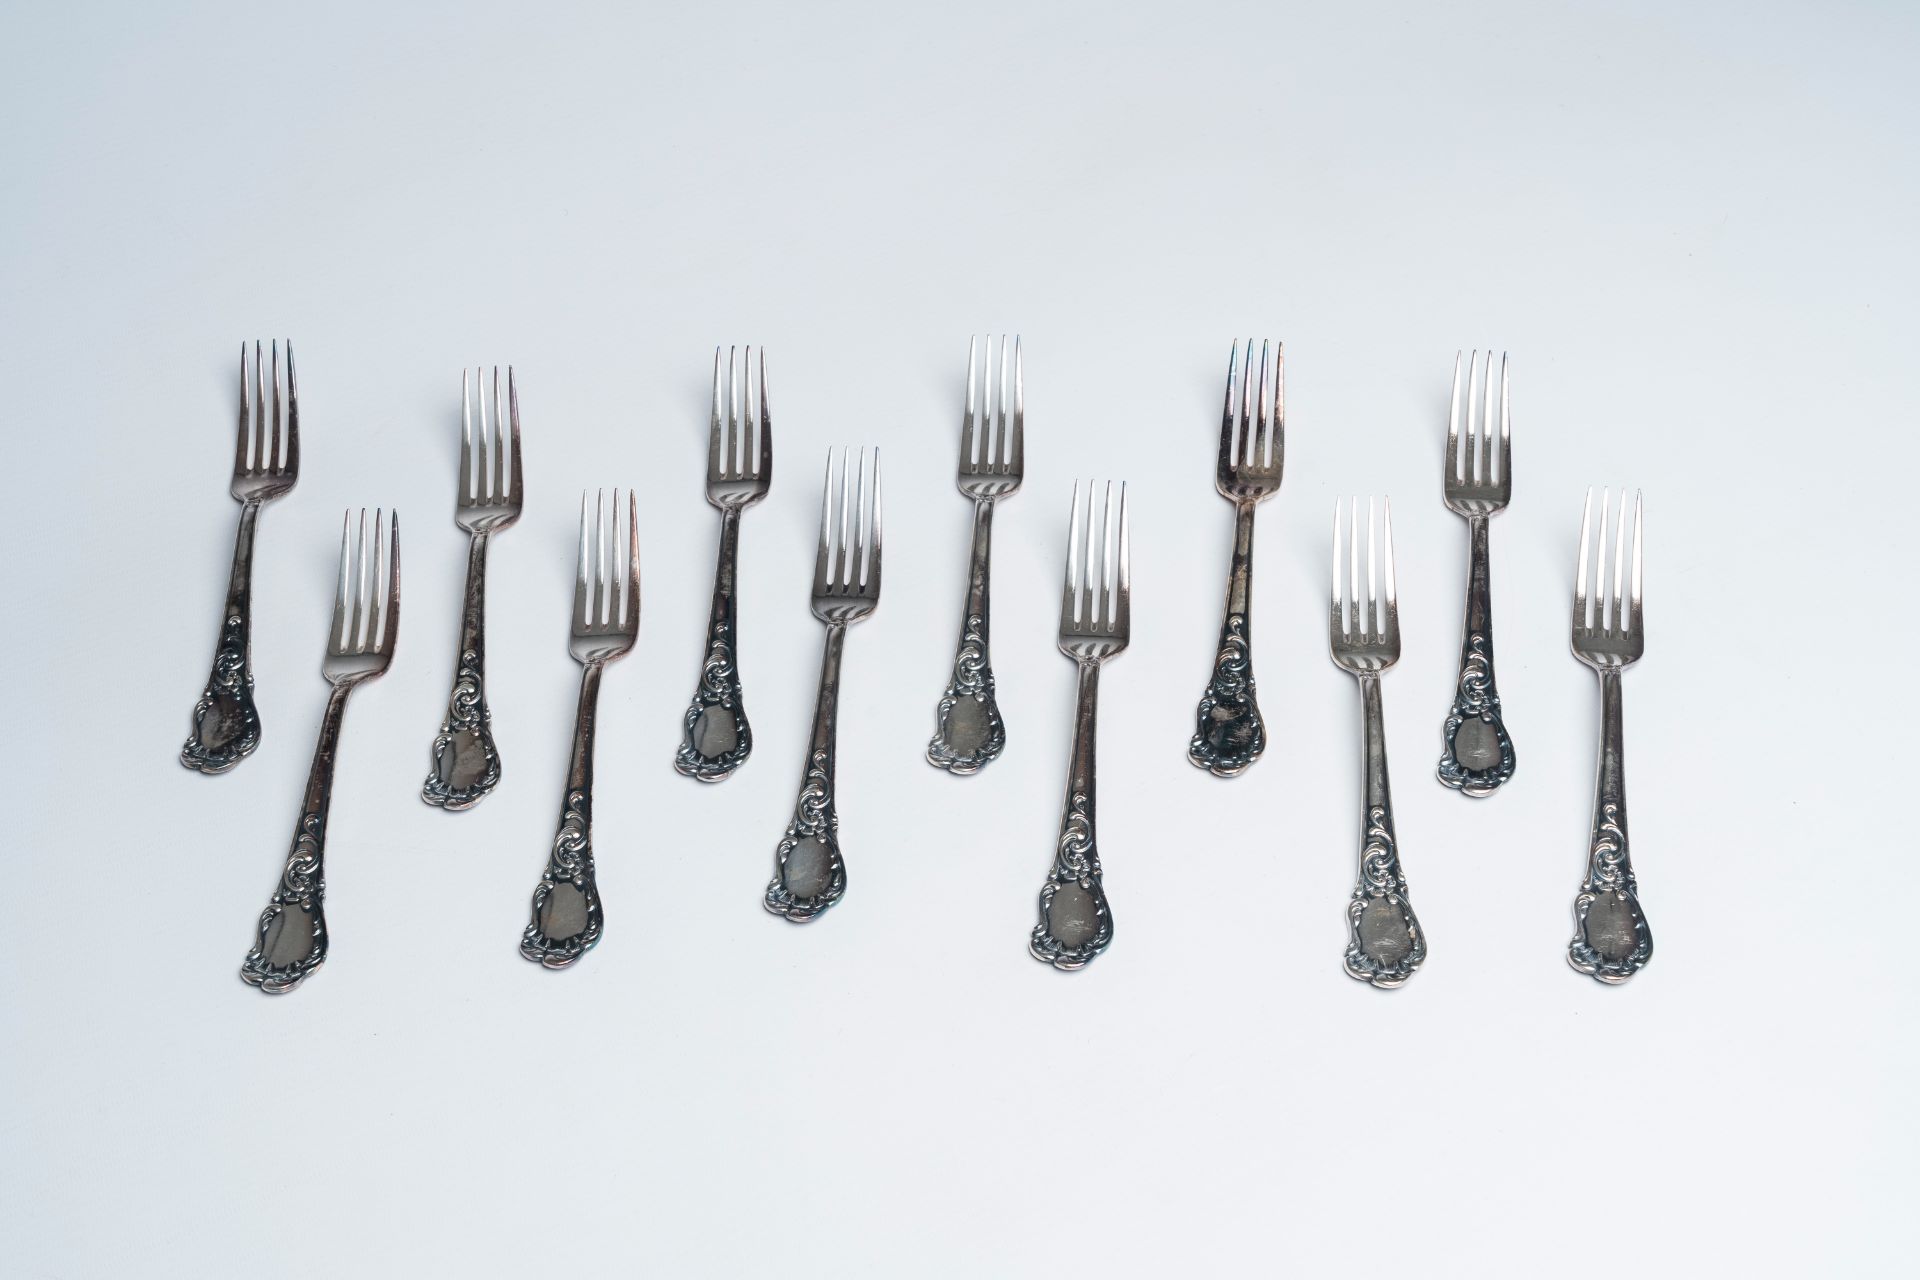 A 103-piece silver plated rococo style cutlery set with matching box, Picard & Wielputz, Germany, 20 - Image 5 of 12